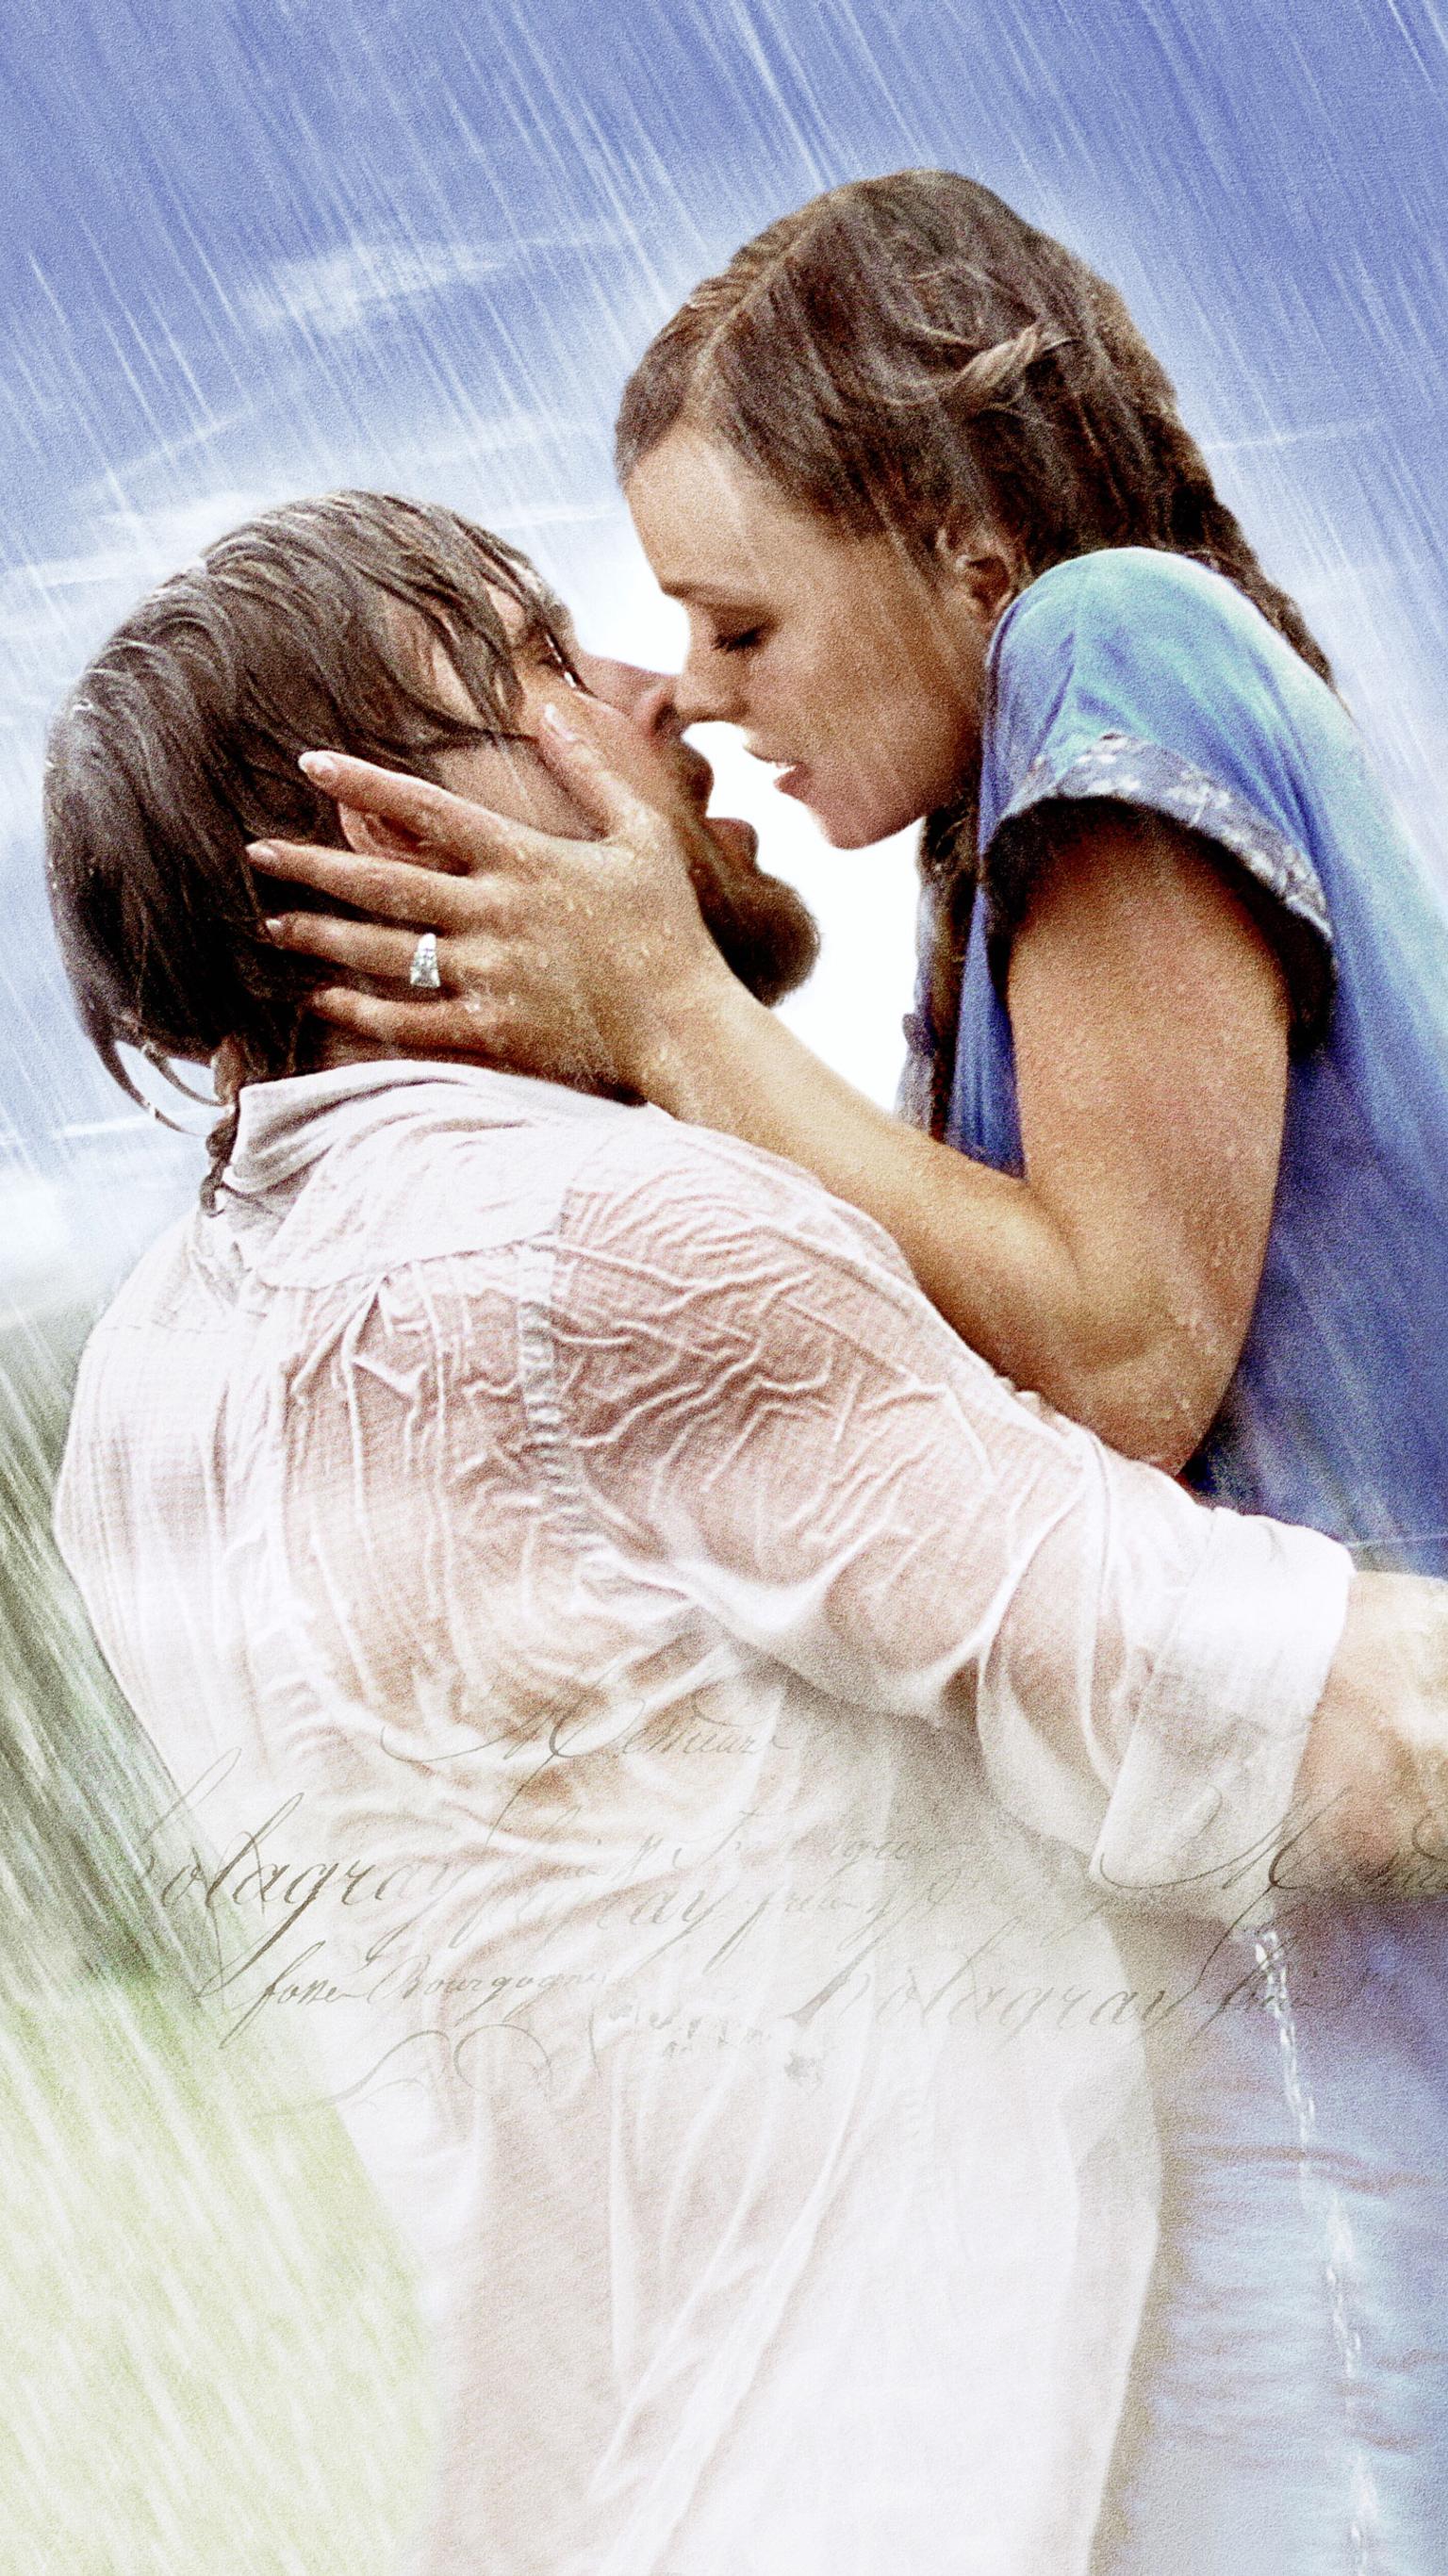 The Notebook Wallpaper Free The Notebook Background